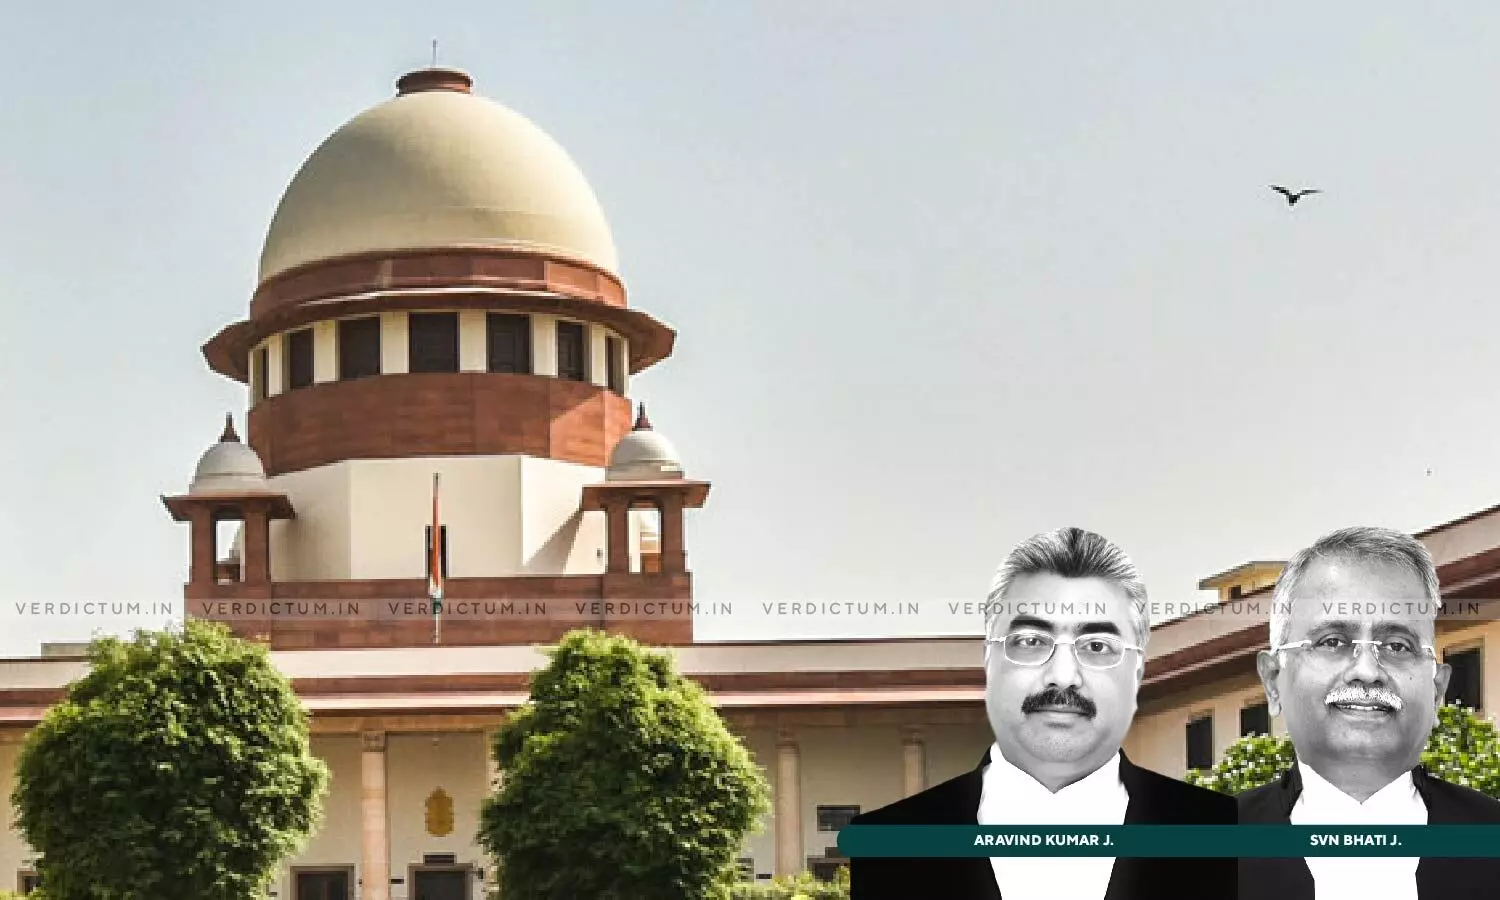 SC Expounds Two Questions Which Should Be Asked To Accused Once Presumption U/s. 139 Of NI Act Is Applicable In Cheque Dishonour Cases